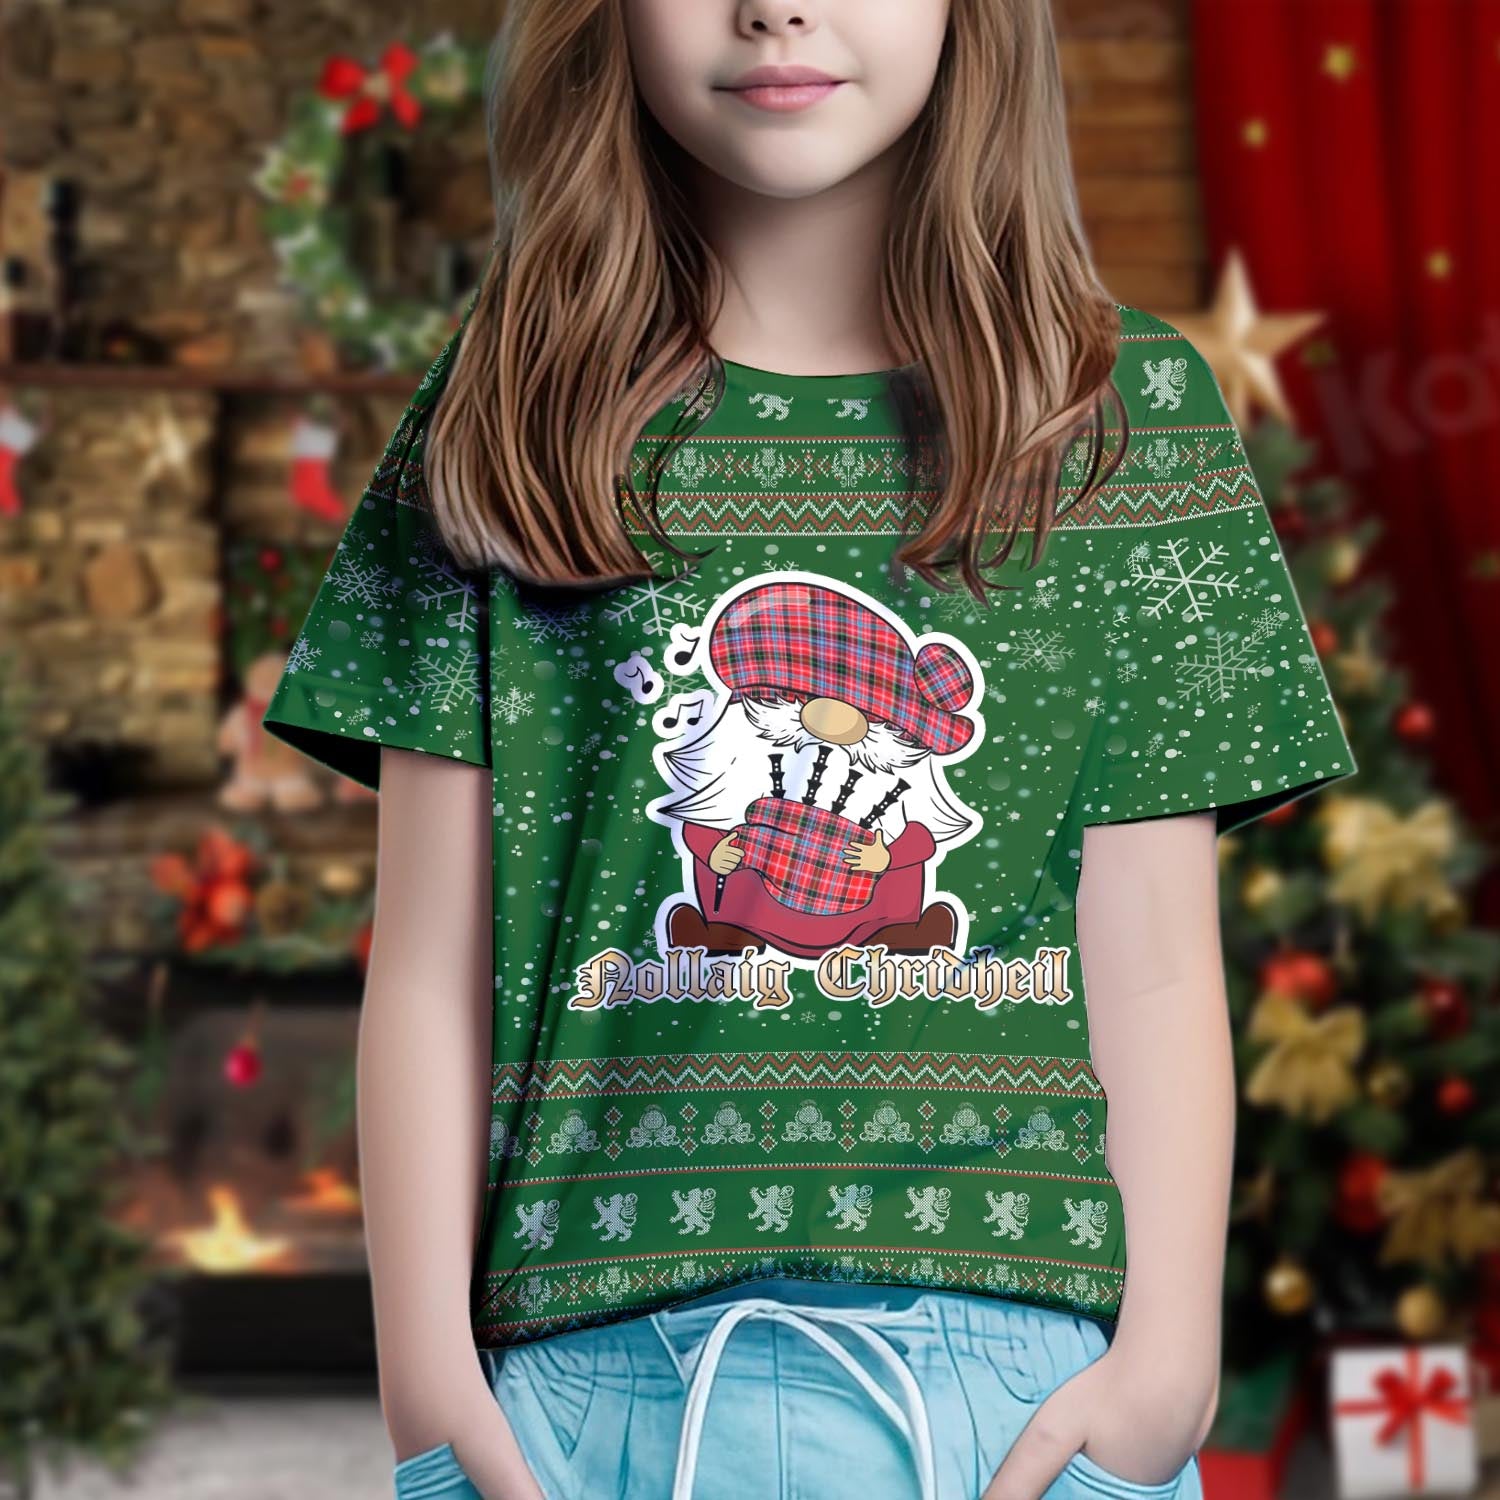 Aberdeen District Clan Christmas Family T-Shirt with Funny Gnome Playing Bagpipes Kid's Shirt Green - Tartanvibesclothing